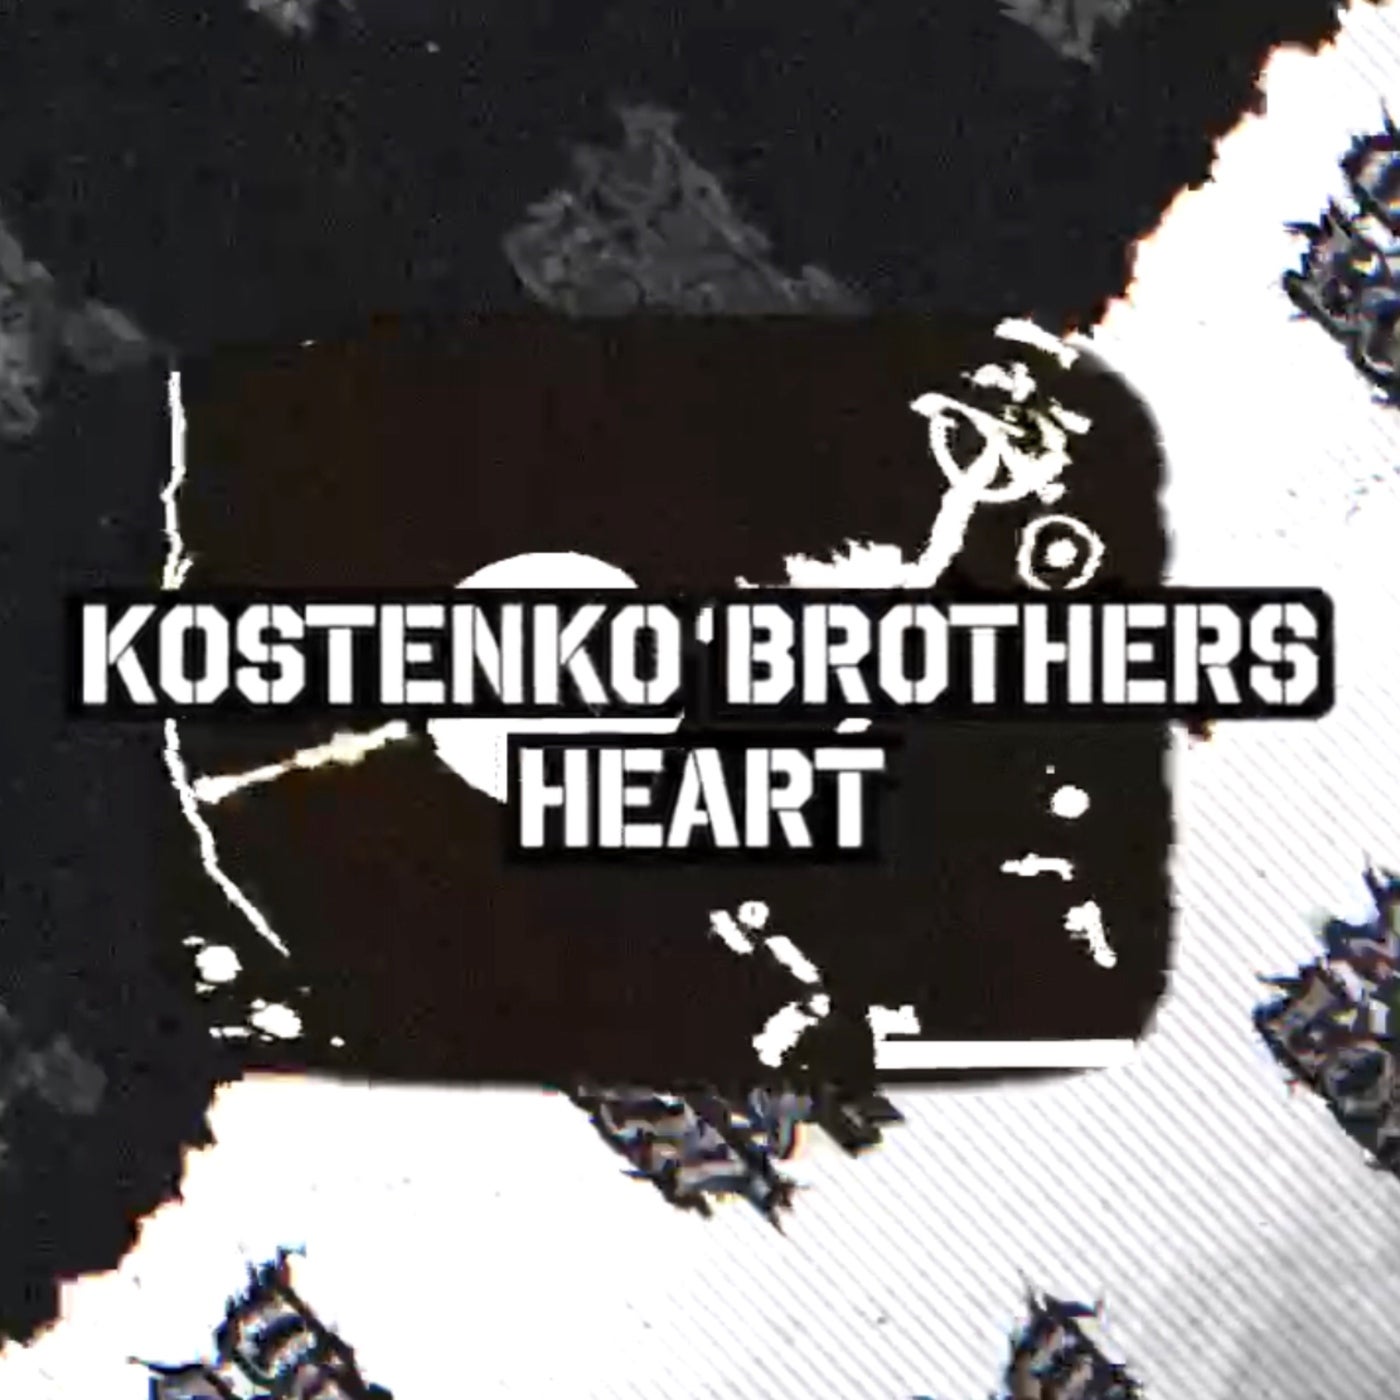 Dirty brothers. Bass brothers. Low Bass brothers. Dirty brothers цуисфь.